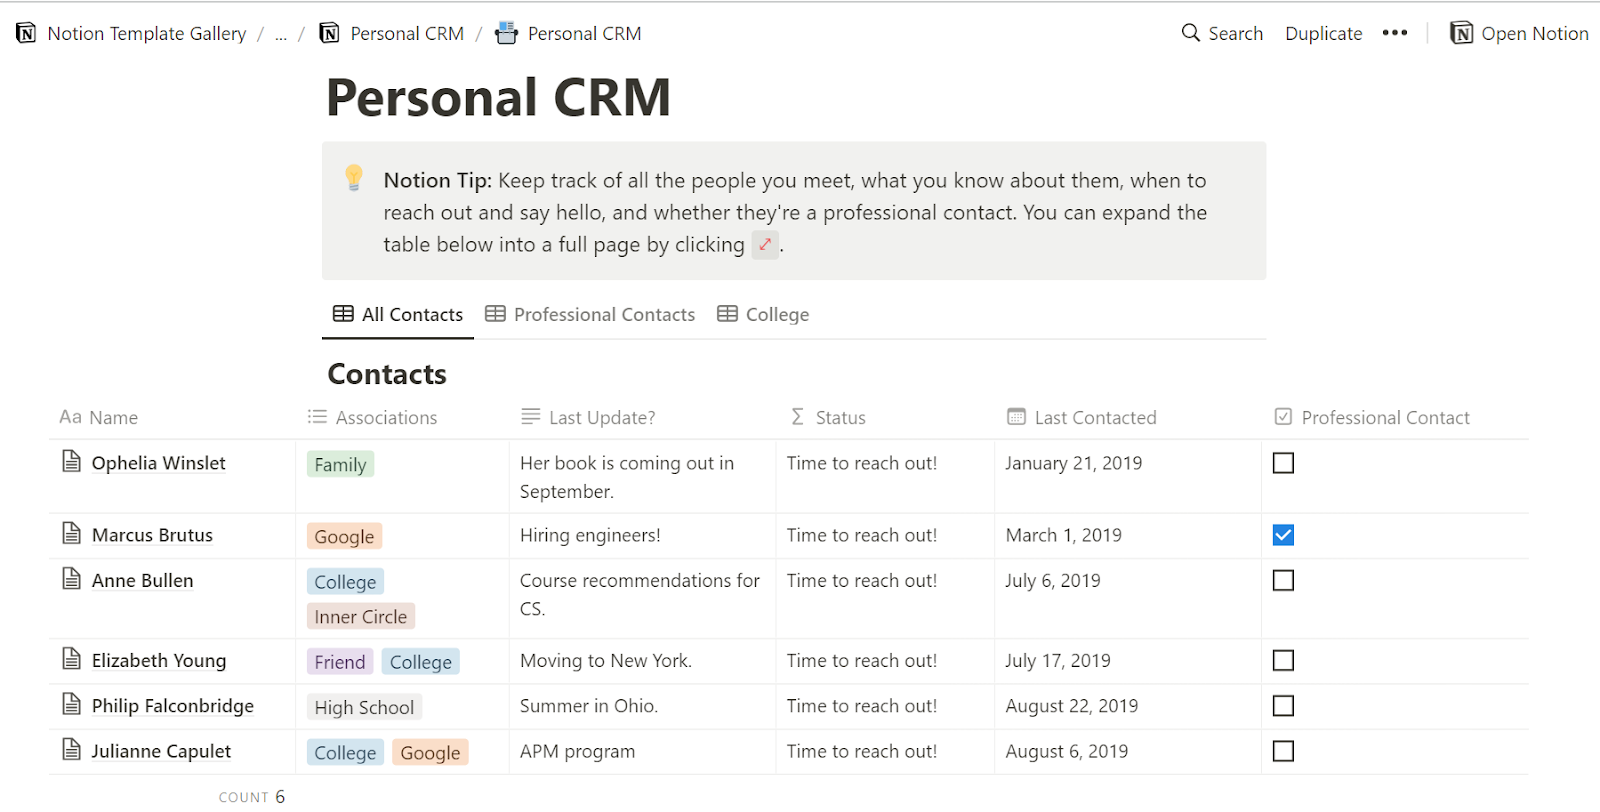 Personal CRM in Notion